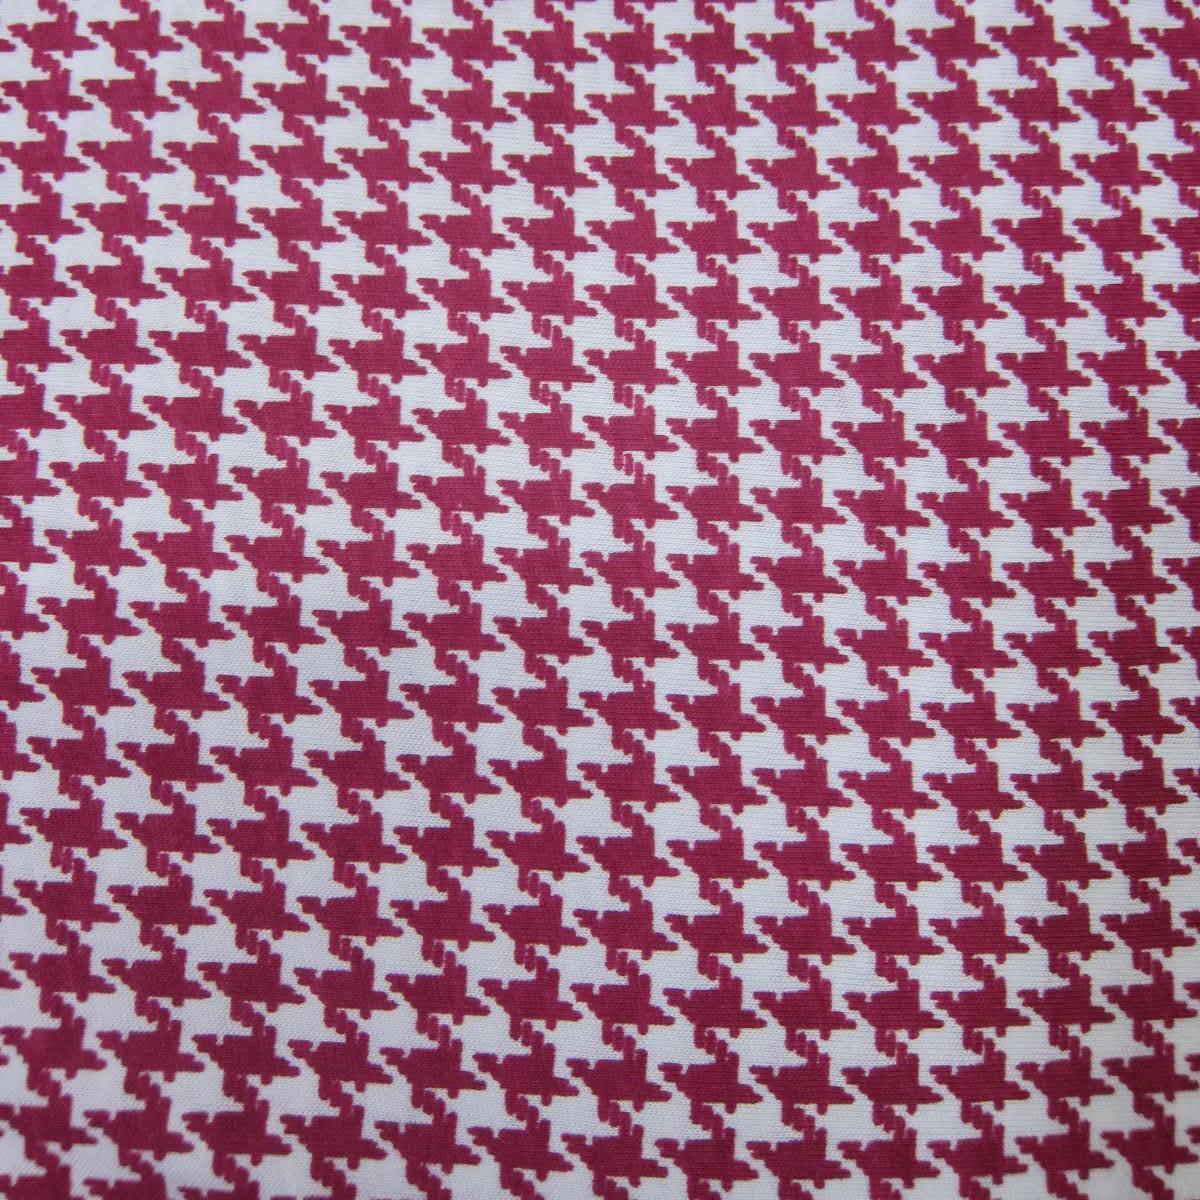 Dark Pink and White Houndstooth on Cotton/Poly Jersey